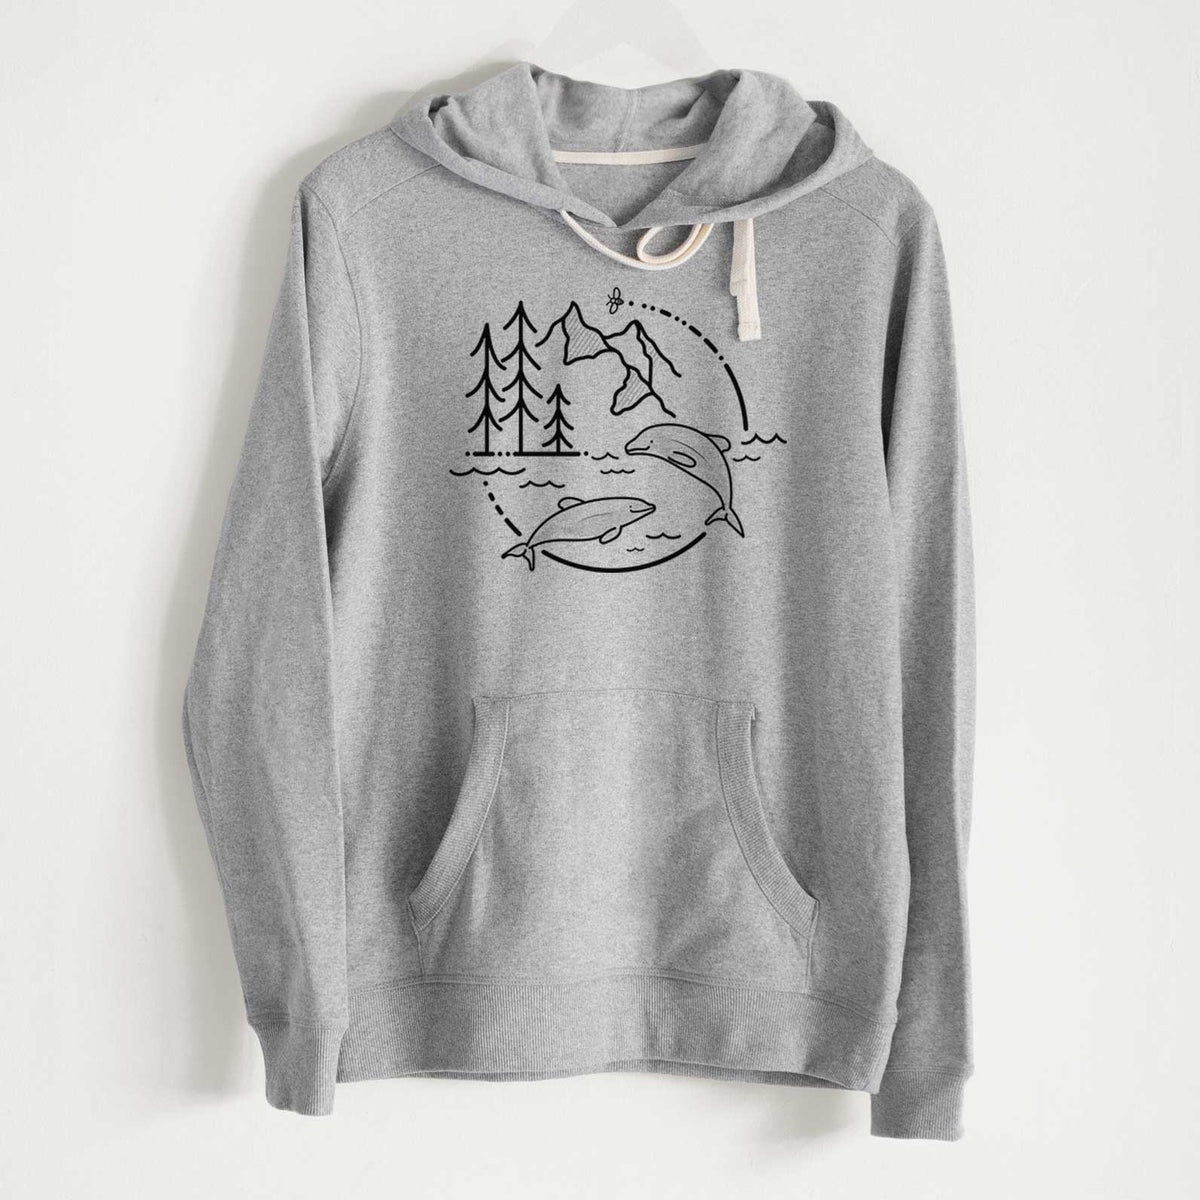 It&#39;s All Connected - Maui Dolphins - Unisex Recycled Hoodie - CLOSEOUT - FINAL SALE